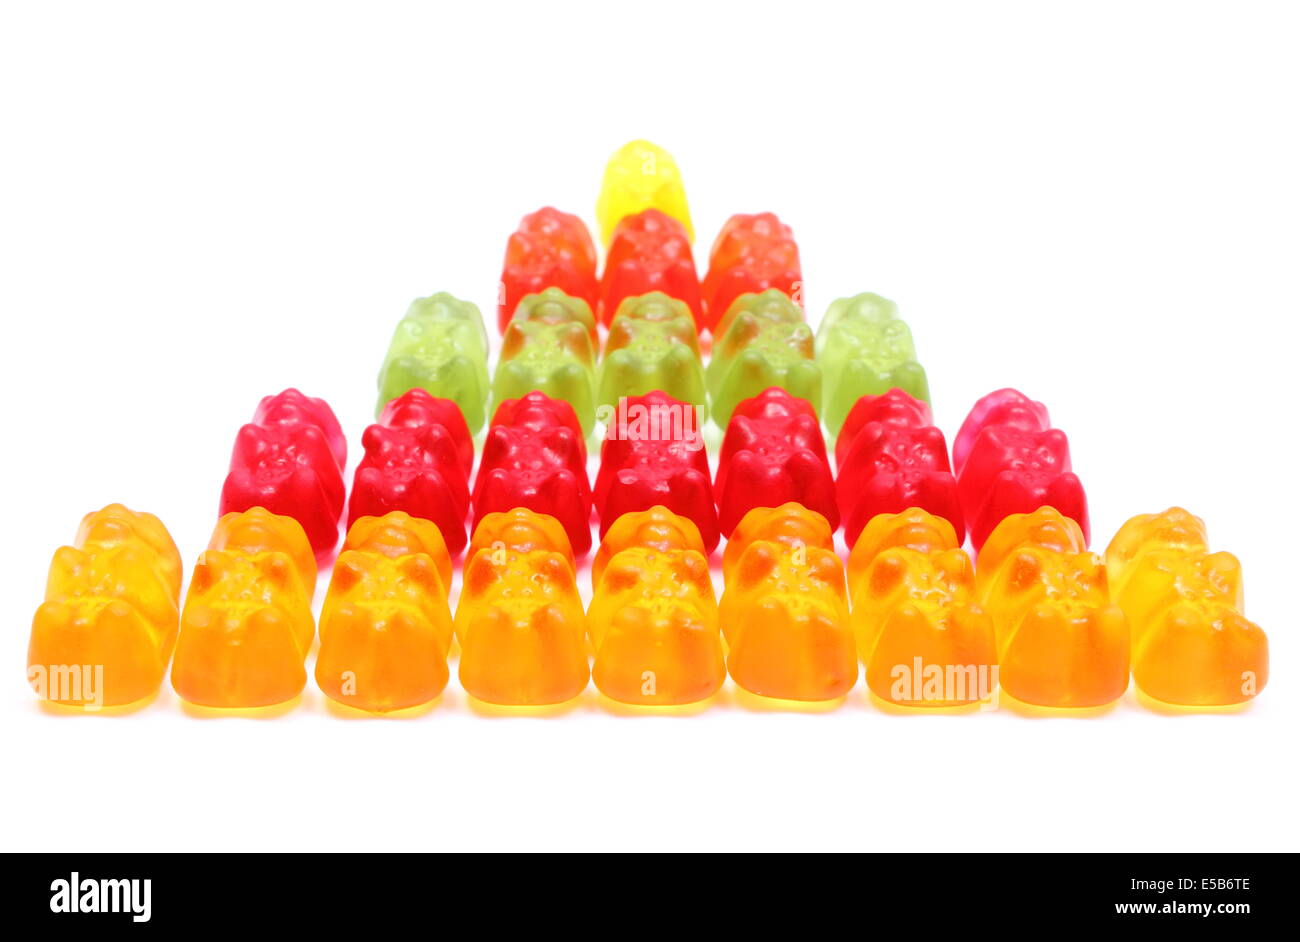 Stack of colorful haribo bear candies. Isolated on white background Stock Photo